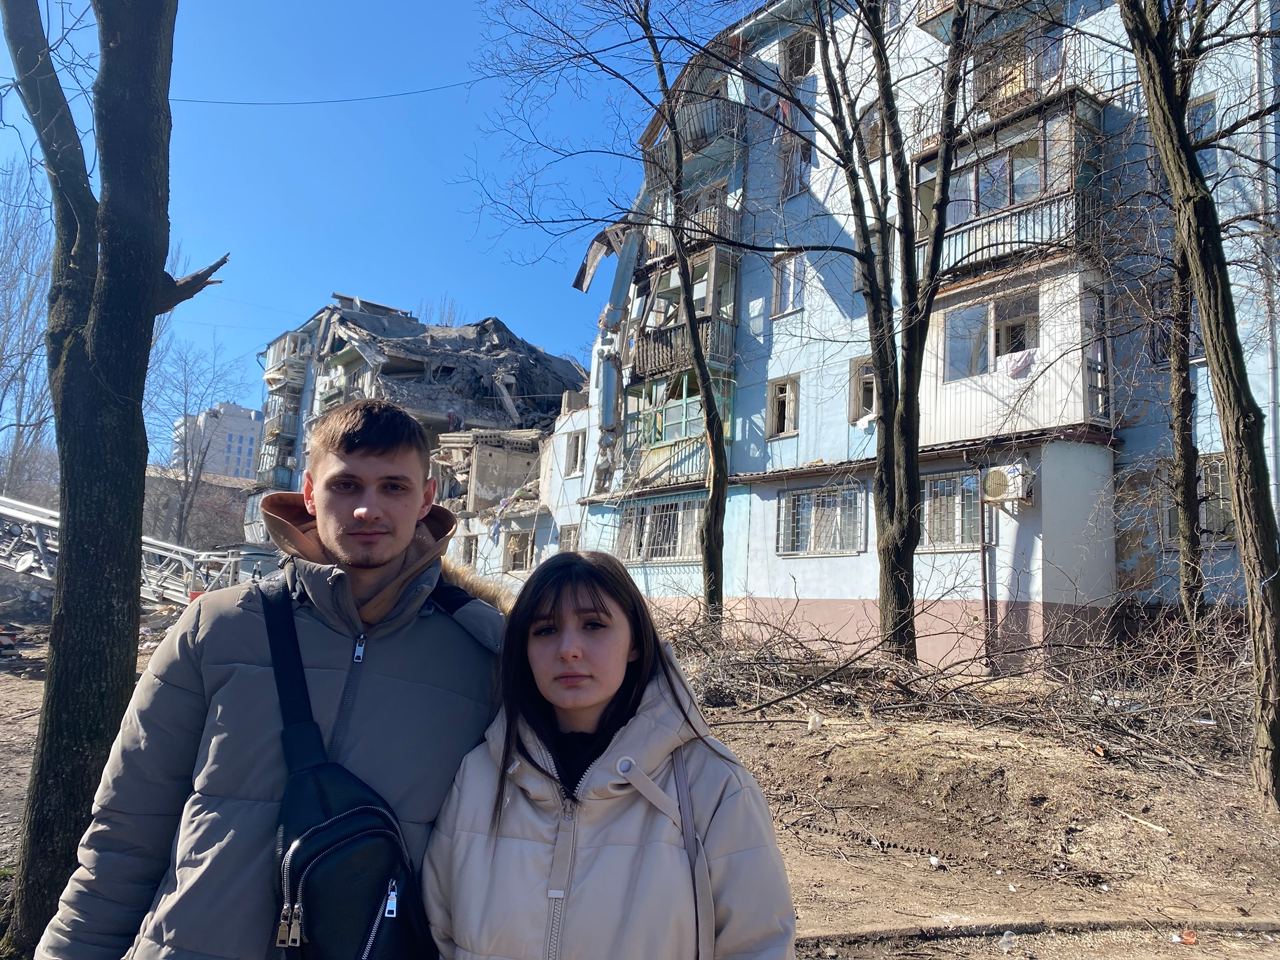 Artem Sytnik, 22, and Veronika Gretskaya, 19, survived the Russian missile strike, but it was the last straw for the couple, who decided to leave Zaporizhzhia. (Alexander Query)